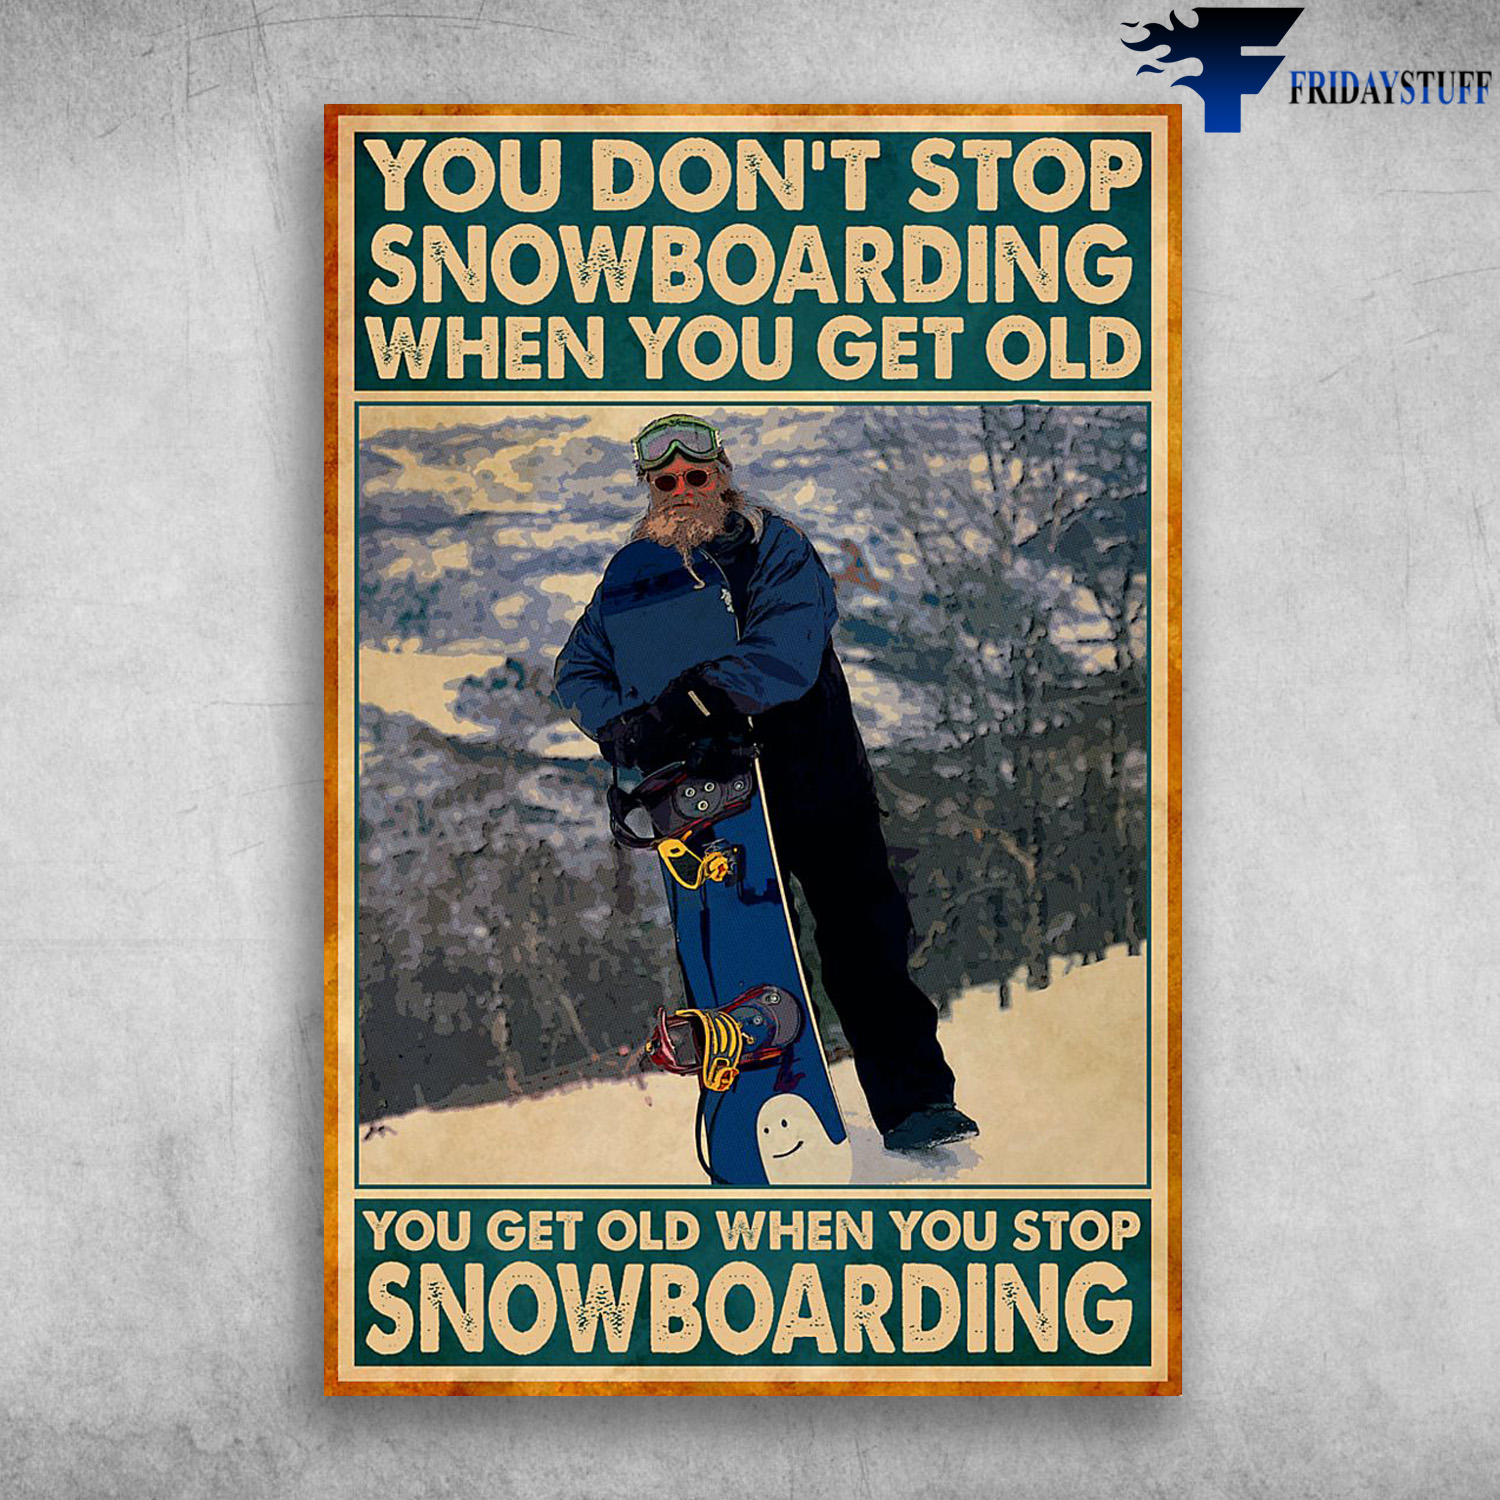 Snowboarding Old Man - You Don't Stop Snowboarding When You Get Old, You Get Old When You Stop Snowboarding